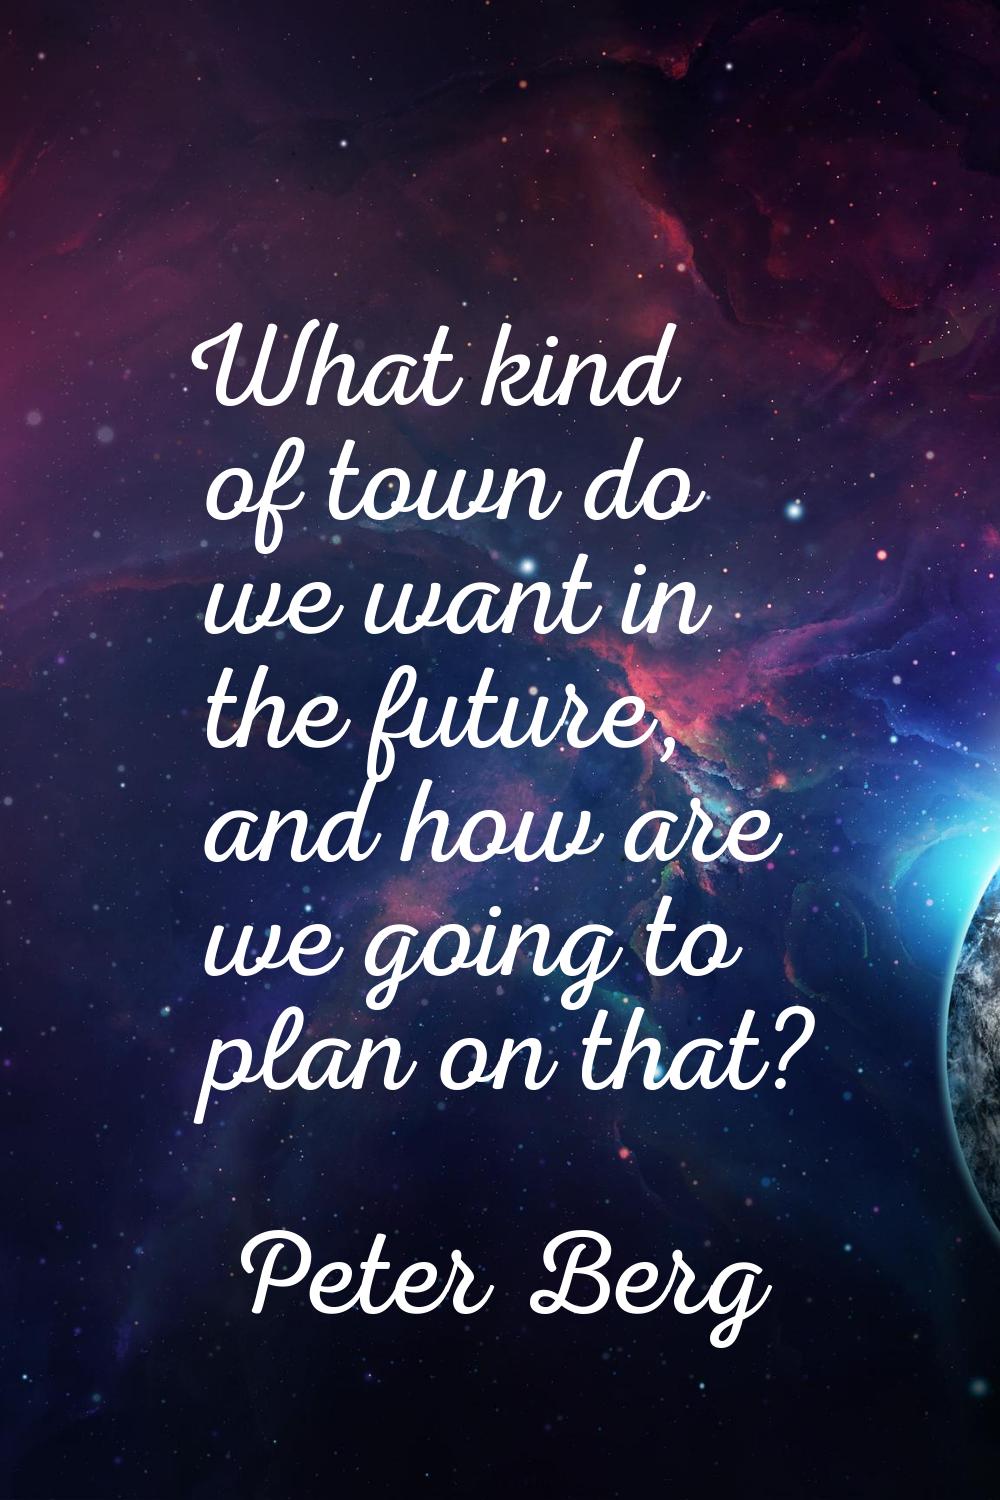 What kind of town do we want in the future, and how are we going to plan on that?